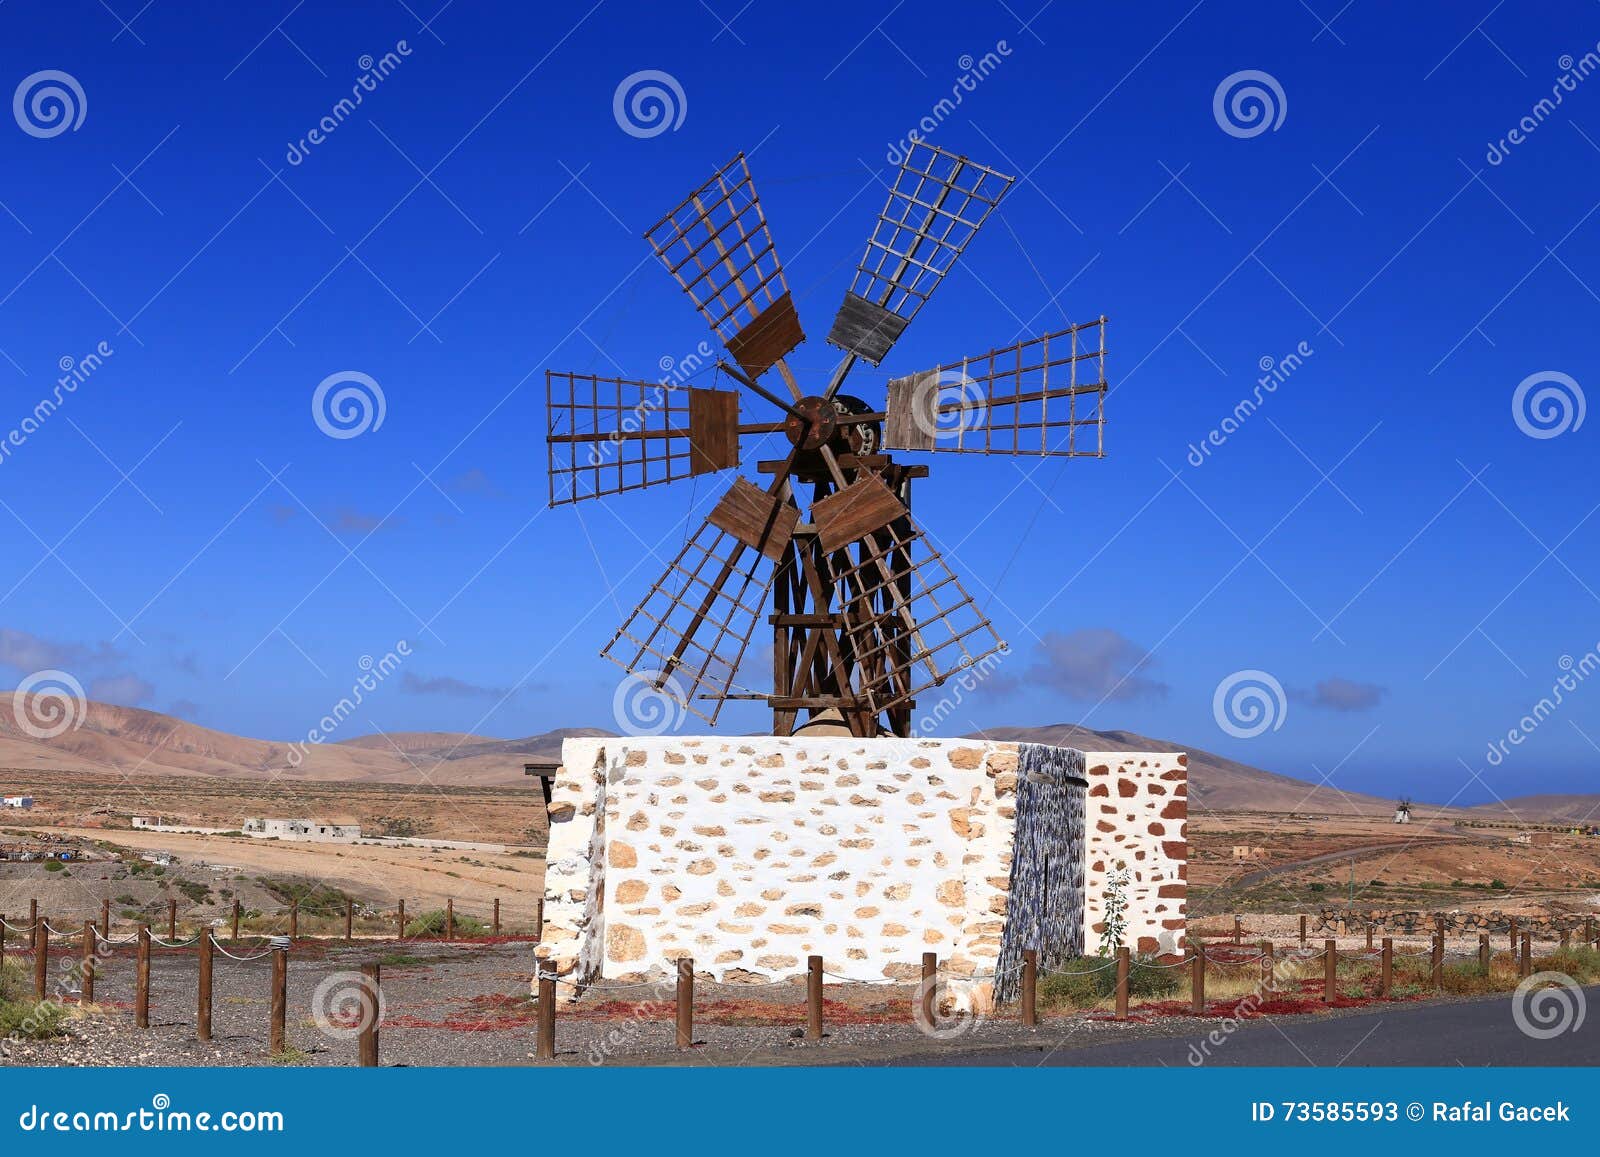 Mechanism of a GIANT WINDMILL to make flour through the grinding of wheat 